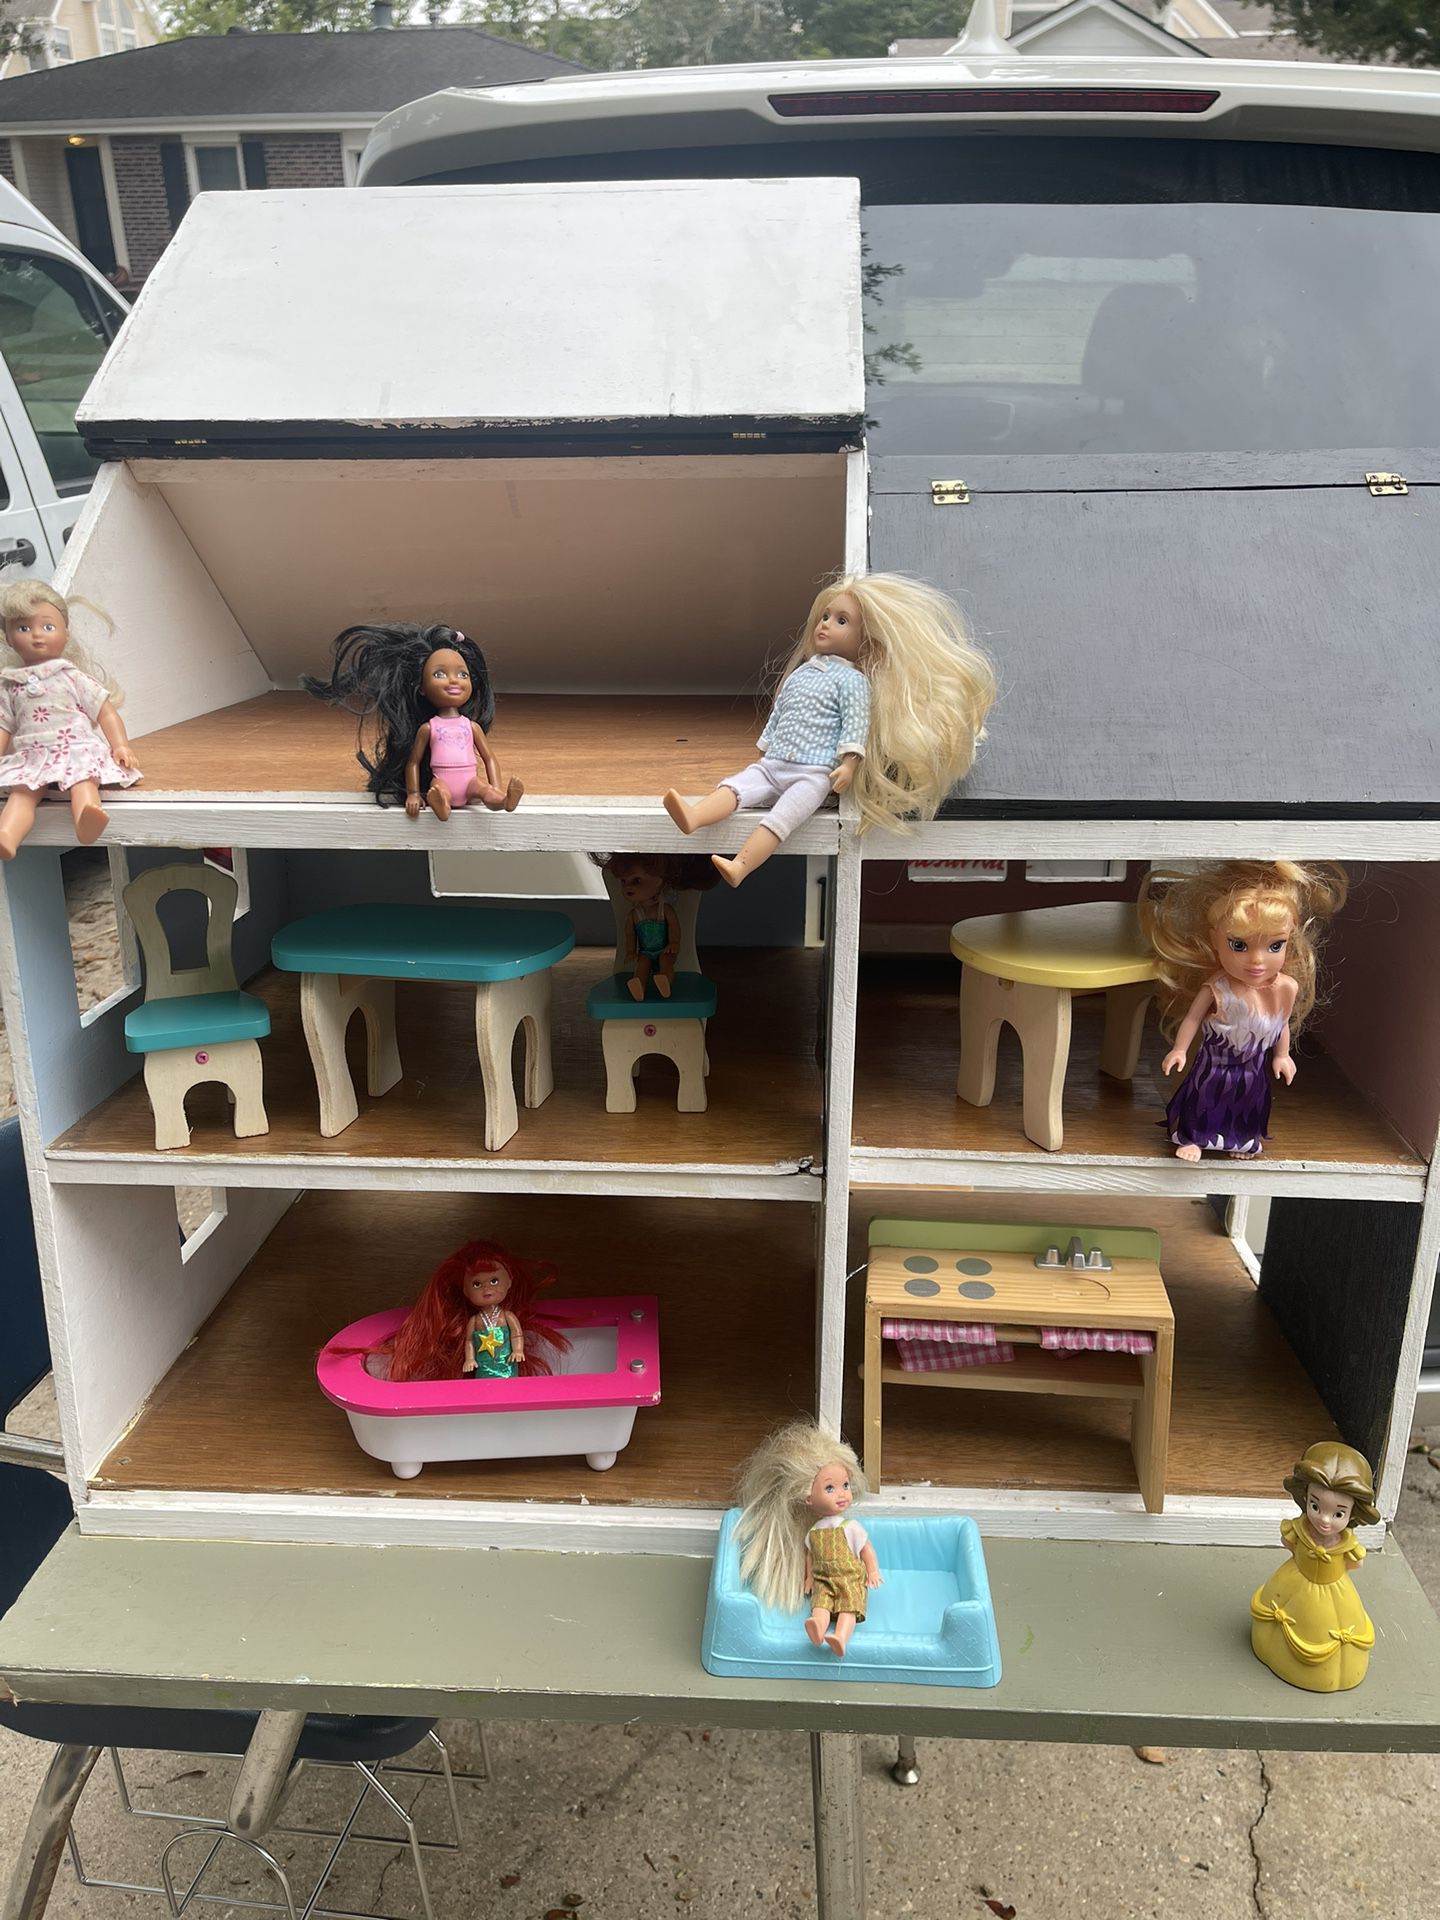 Baby or toddler play doll house